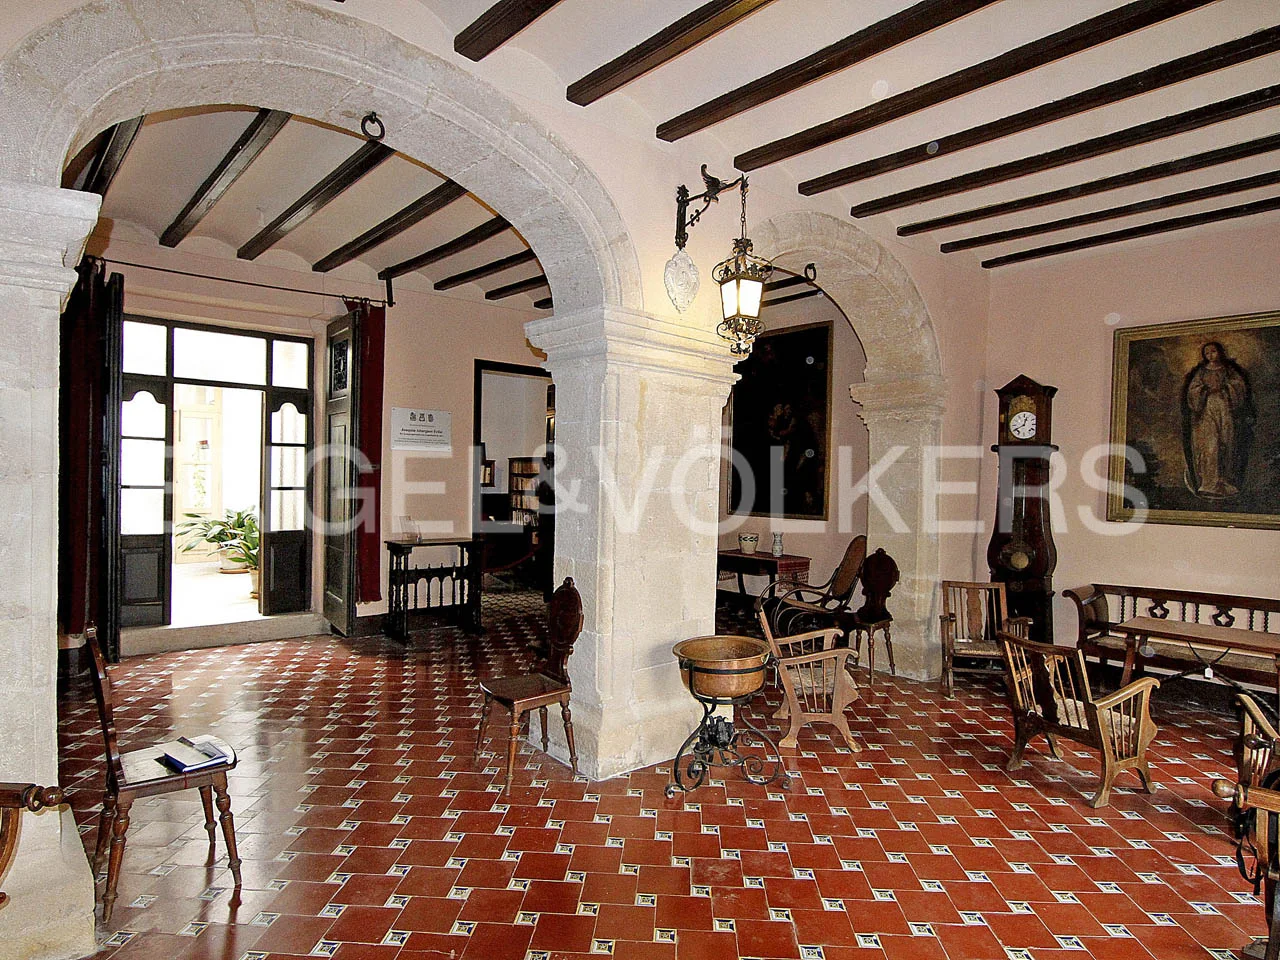 Ancient well kept Manor House in Old Town Benissa - Costa Blanca